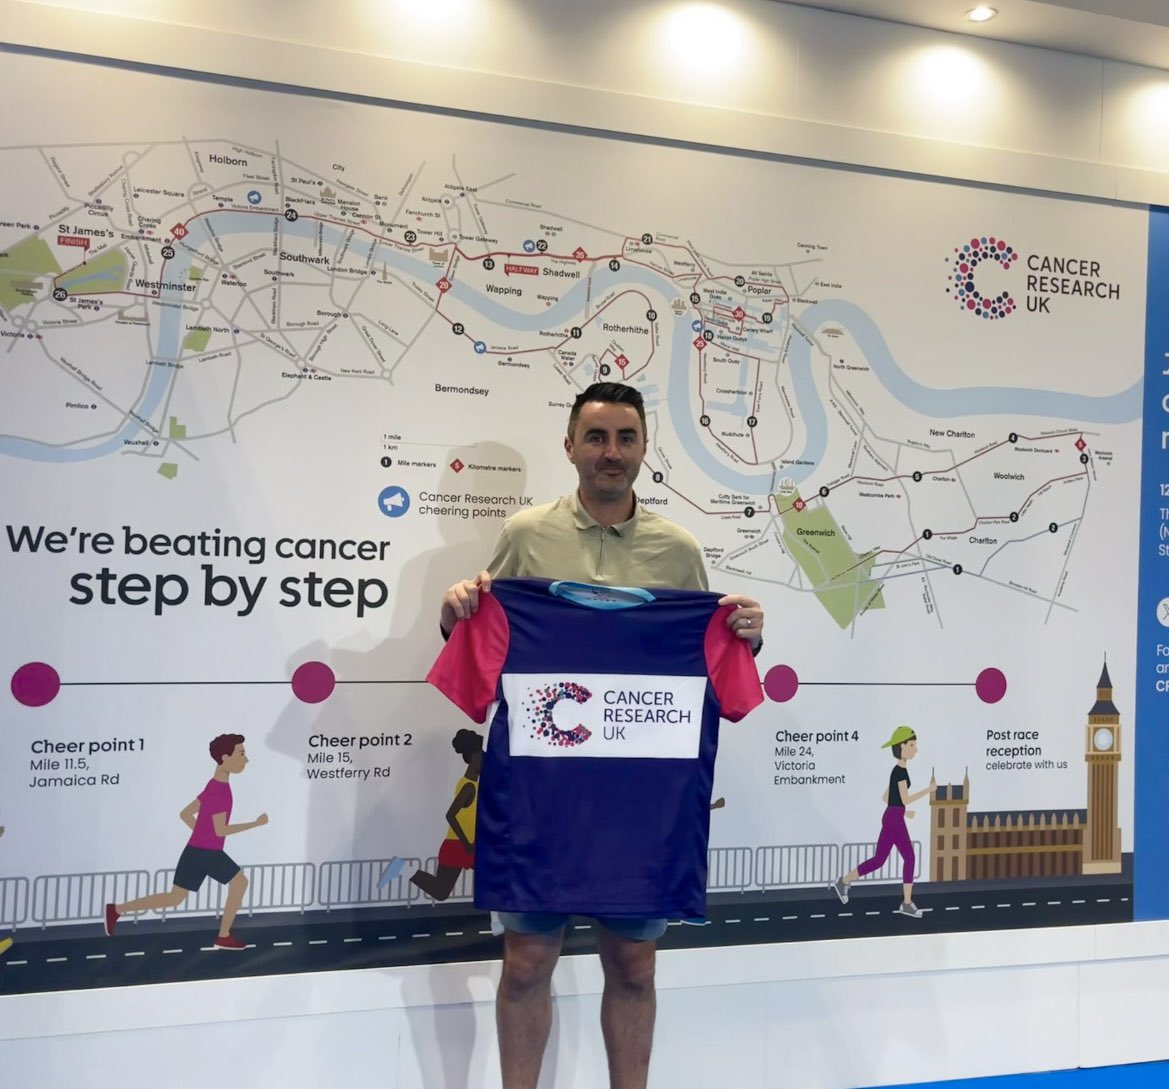 Best of luck to our Mr Belton who is running the London Marathon today! We will update on his progress throughout the day. Any messages of support will be sent directly to him so he can read them on his watch, let’s hope the messages get him round the 26 miles even quicker 🏃🏻‍♂️👏🏼🏃🏻‍♂️